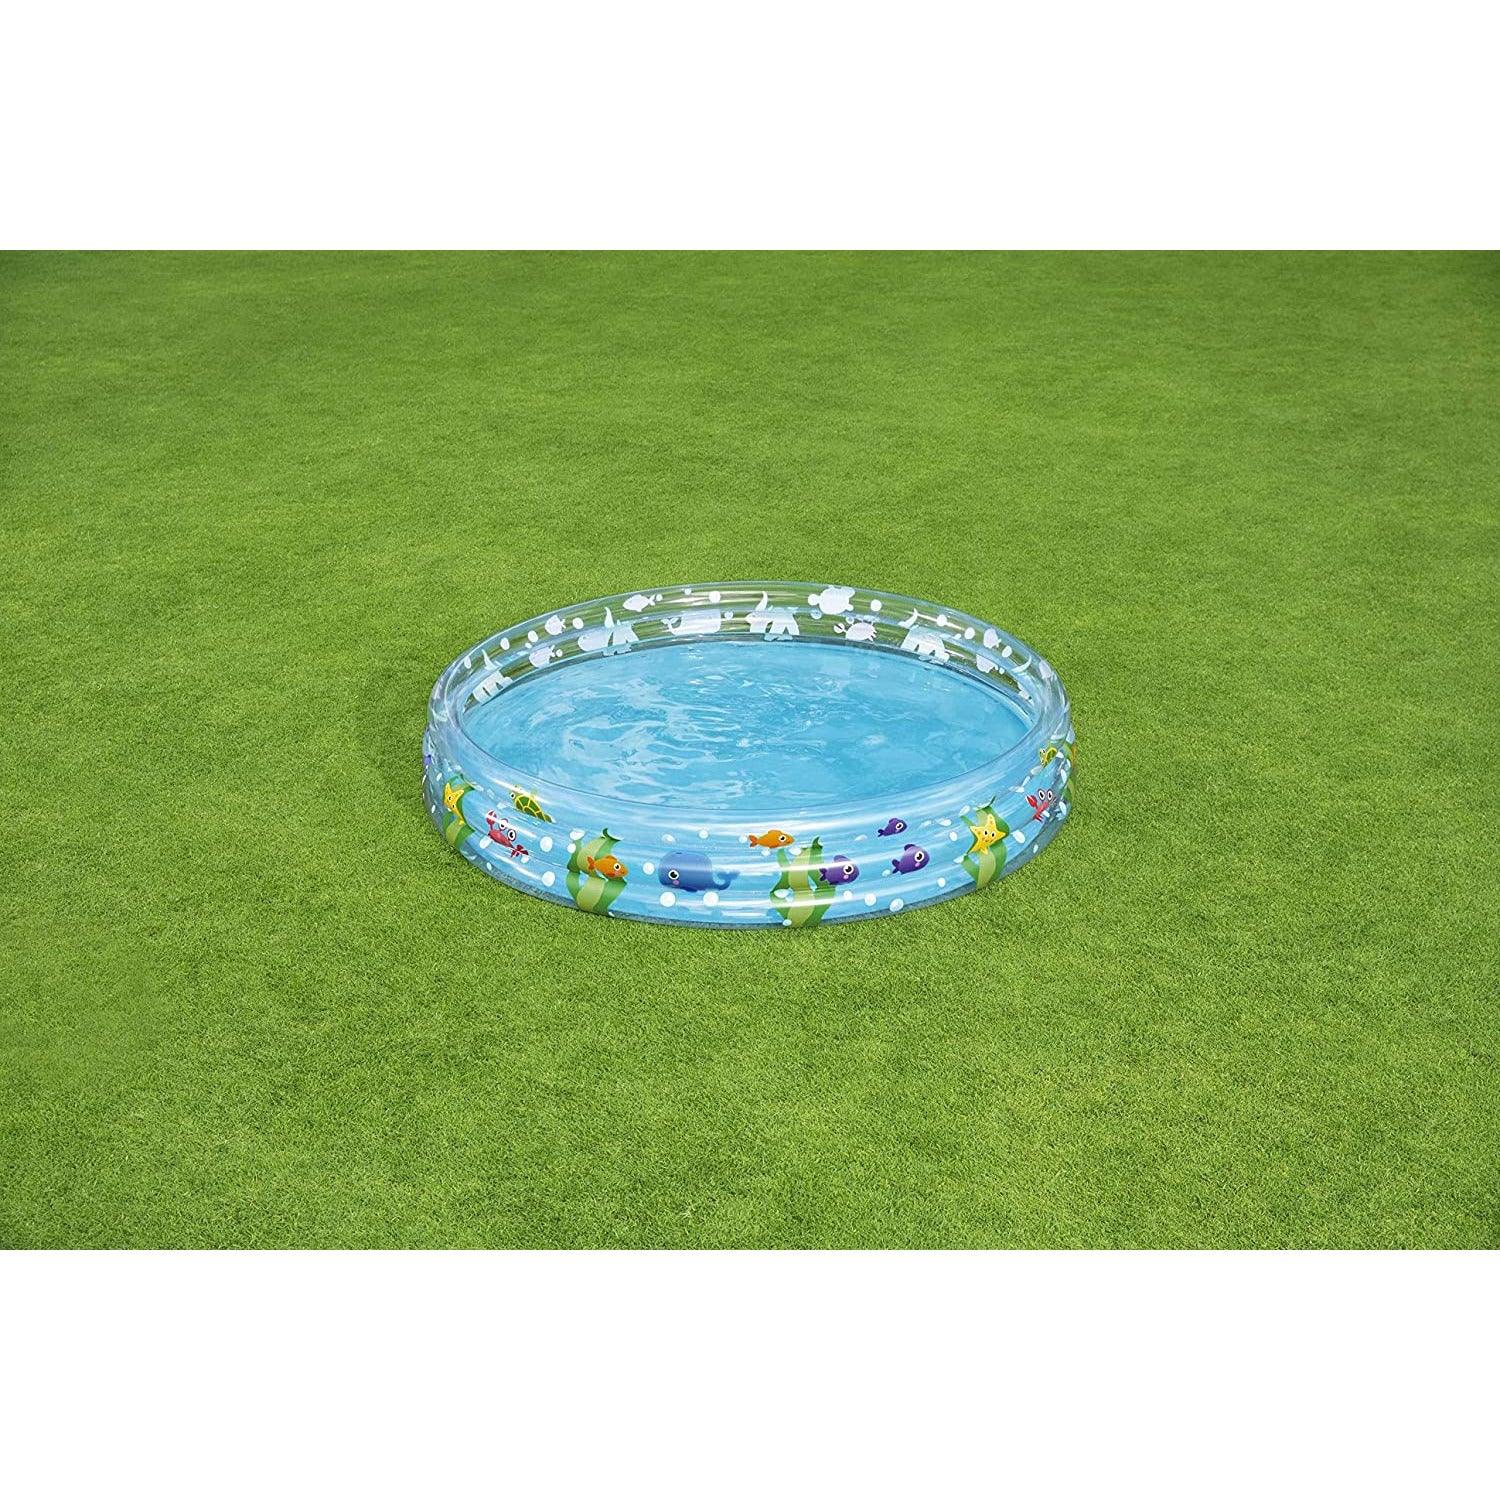 Bestway 51005 Deep Dive 3-Ring Pool - BumbleToys - 5-7 Years, Boys, Girls, Sand Toys Pools & Inflatables